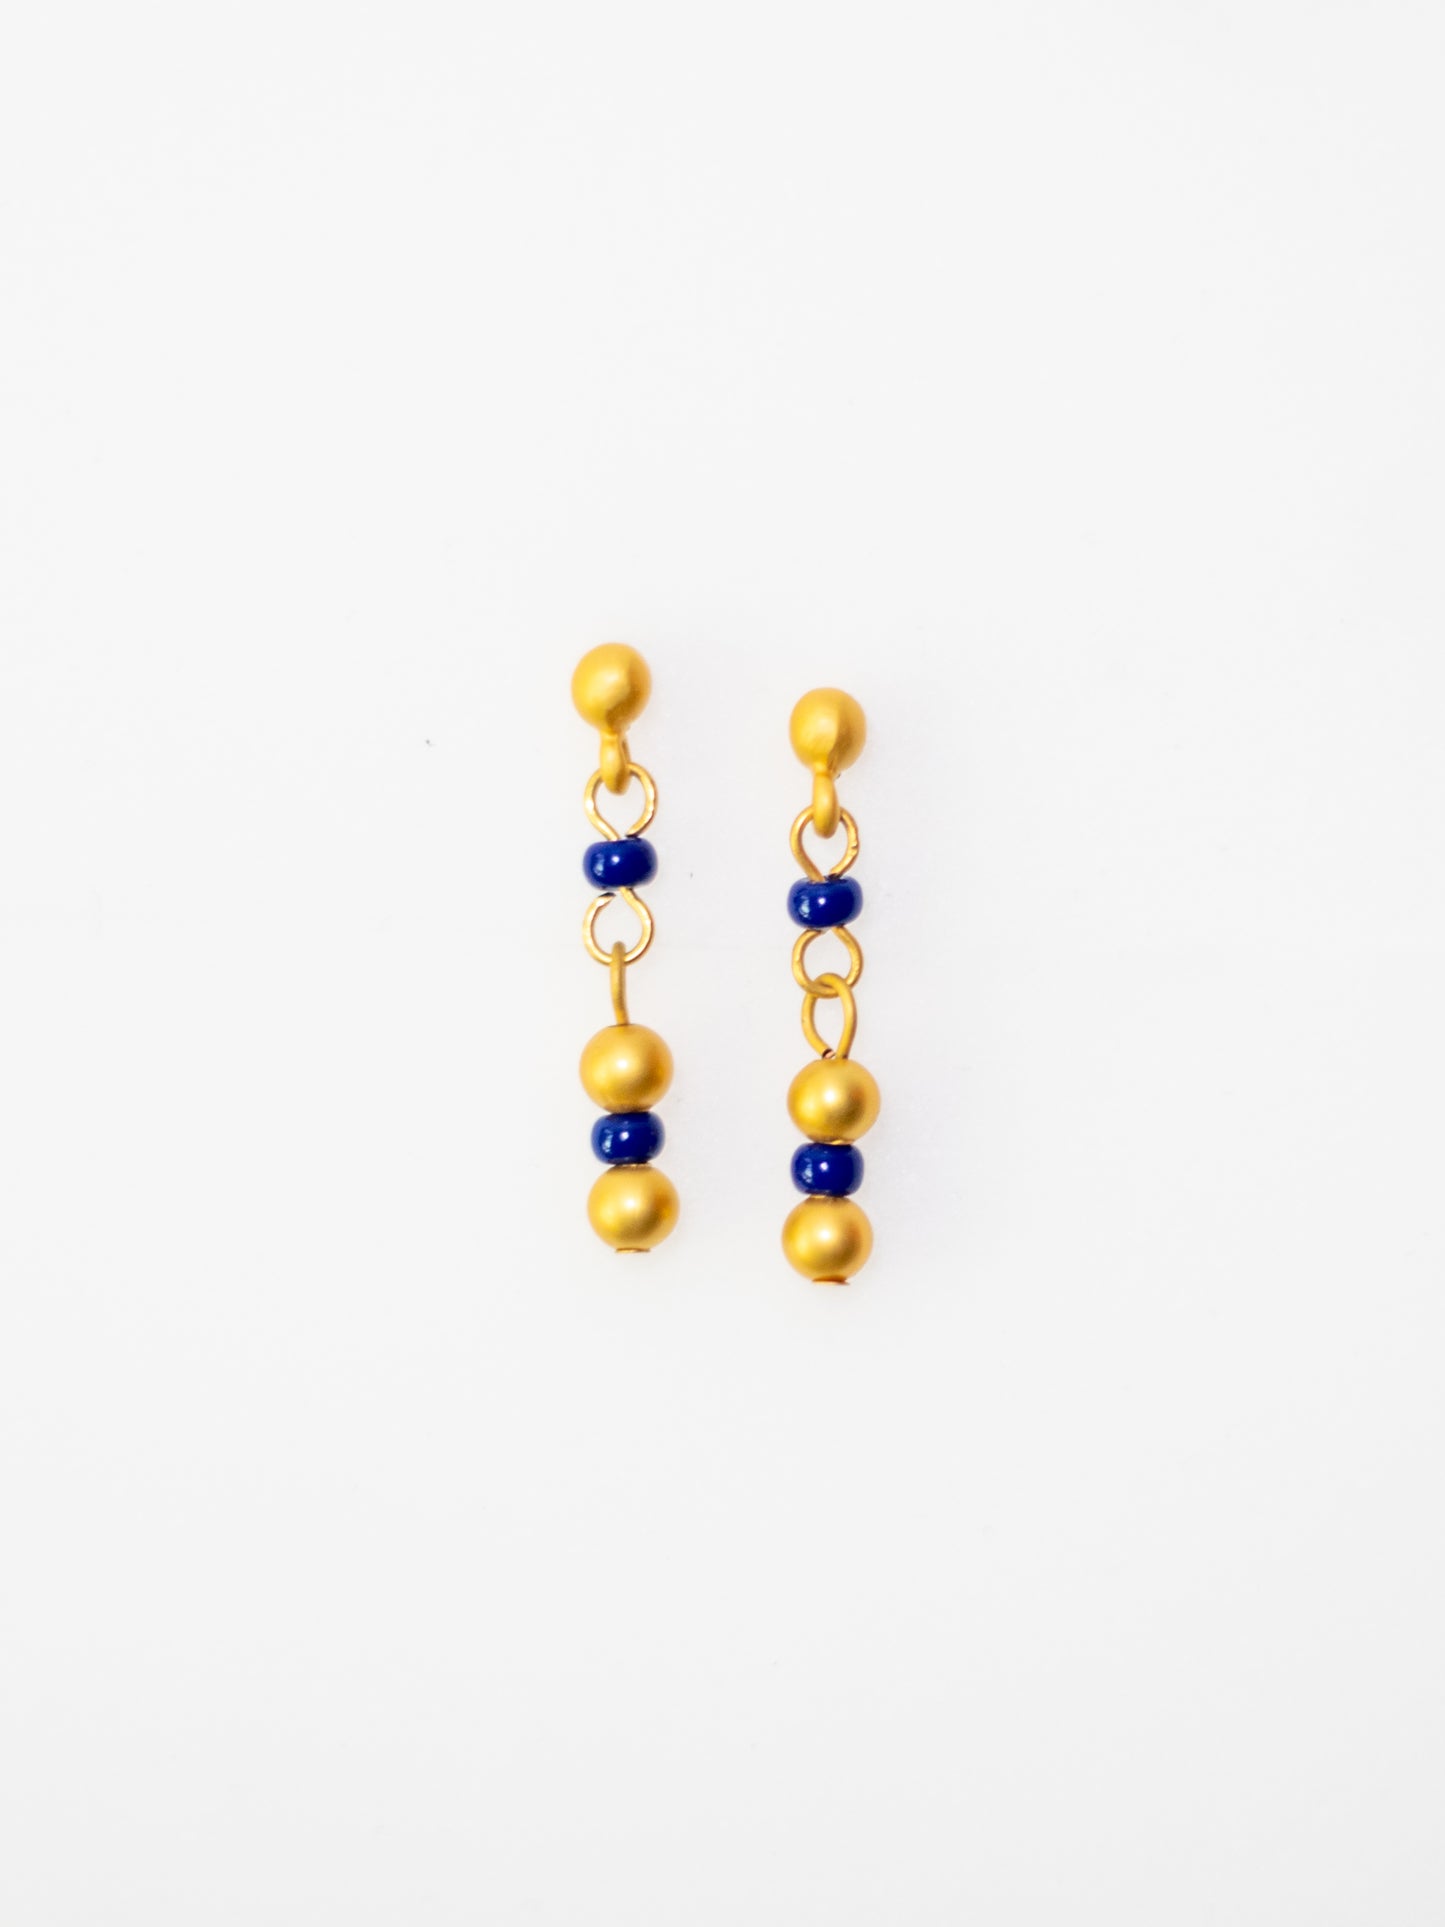 24K Gold Plated Pre-Columbian Muisca Golden and Blue Jewelry Set.